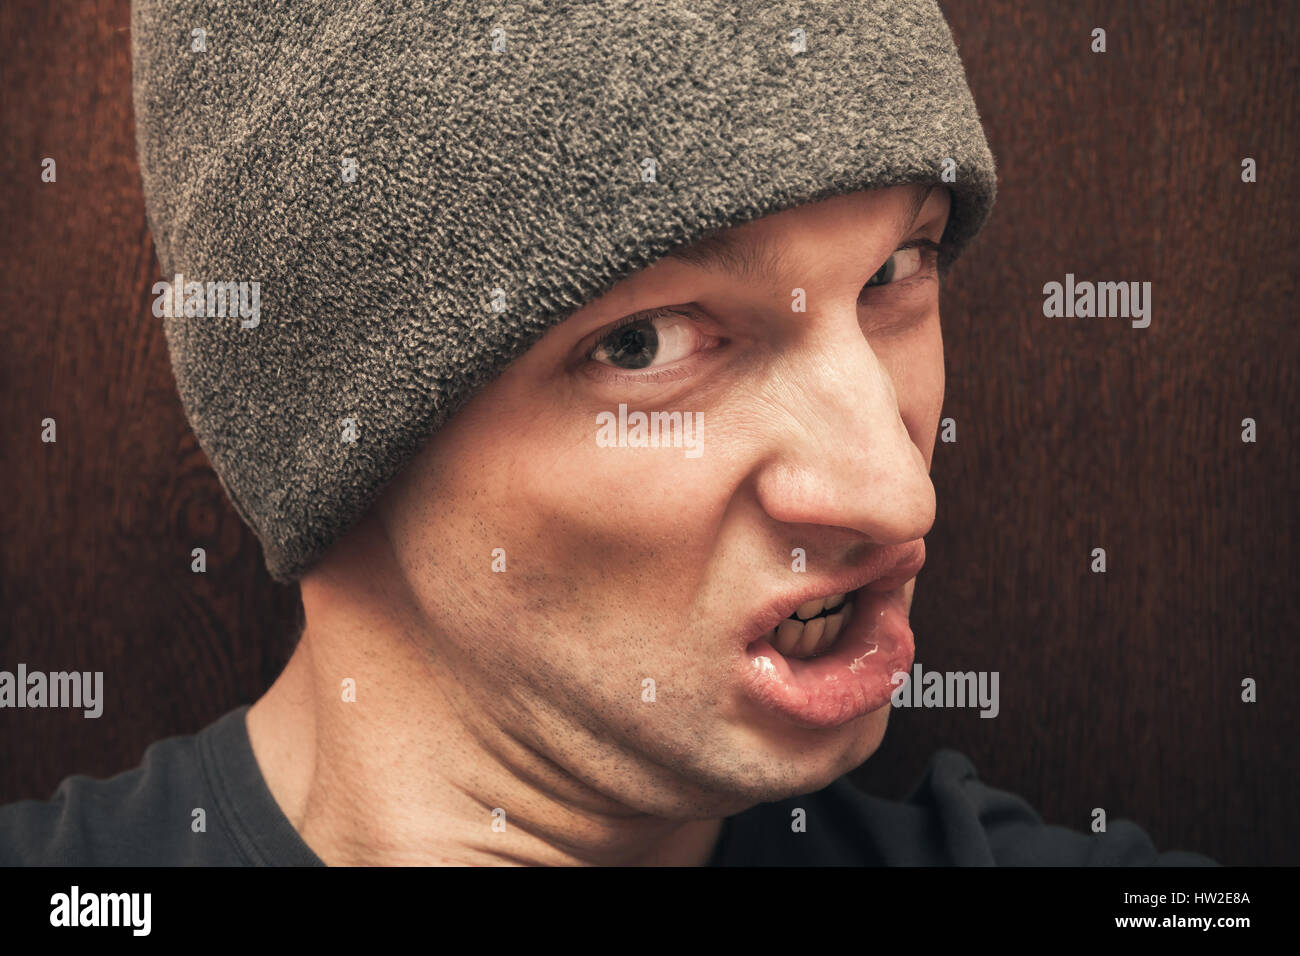 Young agressive Caucasian man in gray hat. Closeup studio face portrait on dark wooden wall background, selective focus Stock Photo